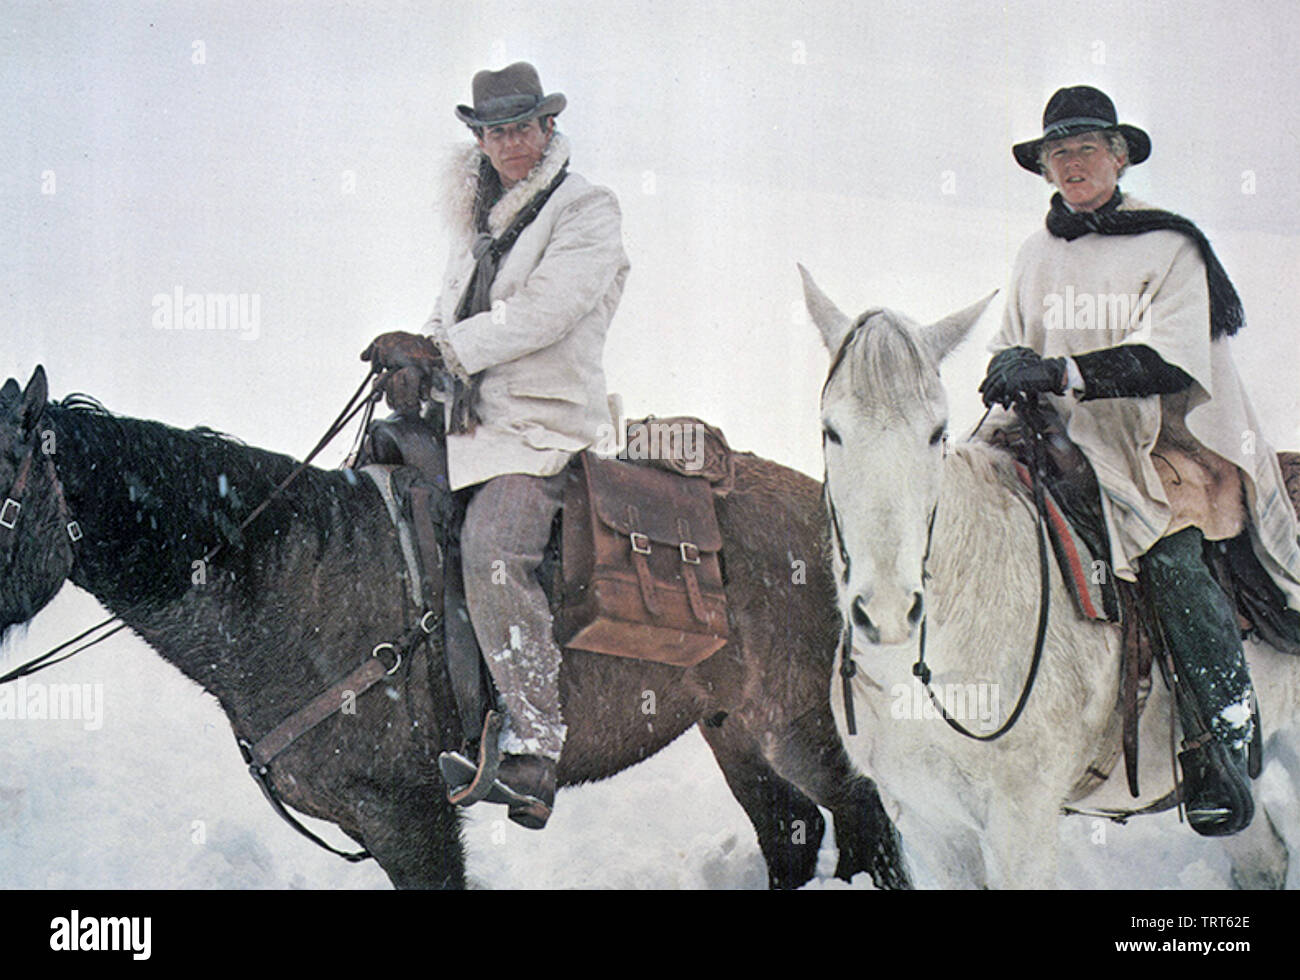 BUTCH AND SUNDANCE : THE EARLY DAYS 1979 20th Century Fox film with Tom Berenger at left and William Katt Stock Photo